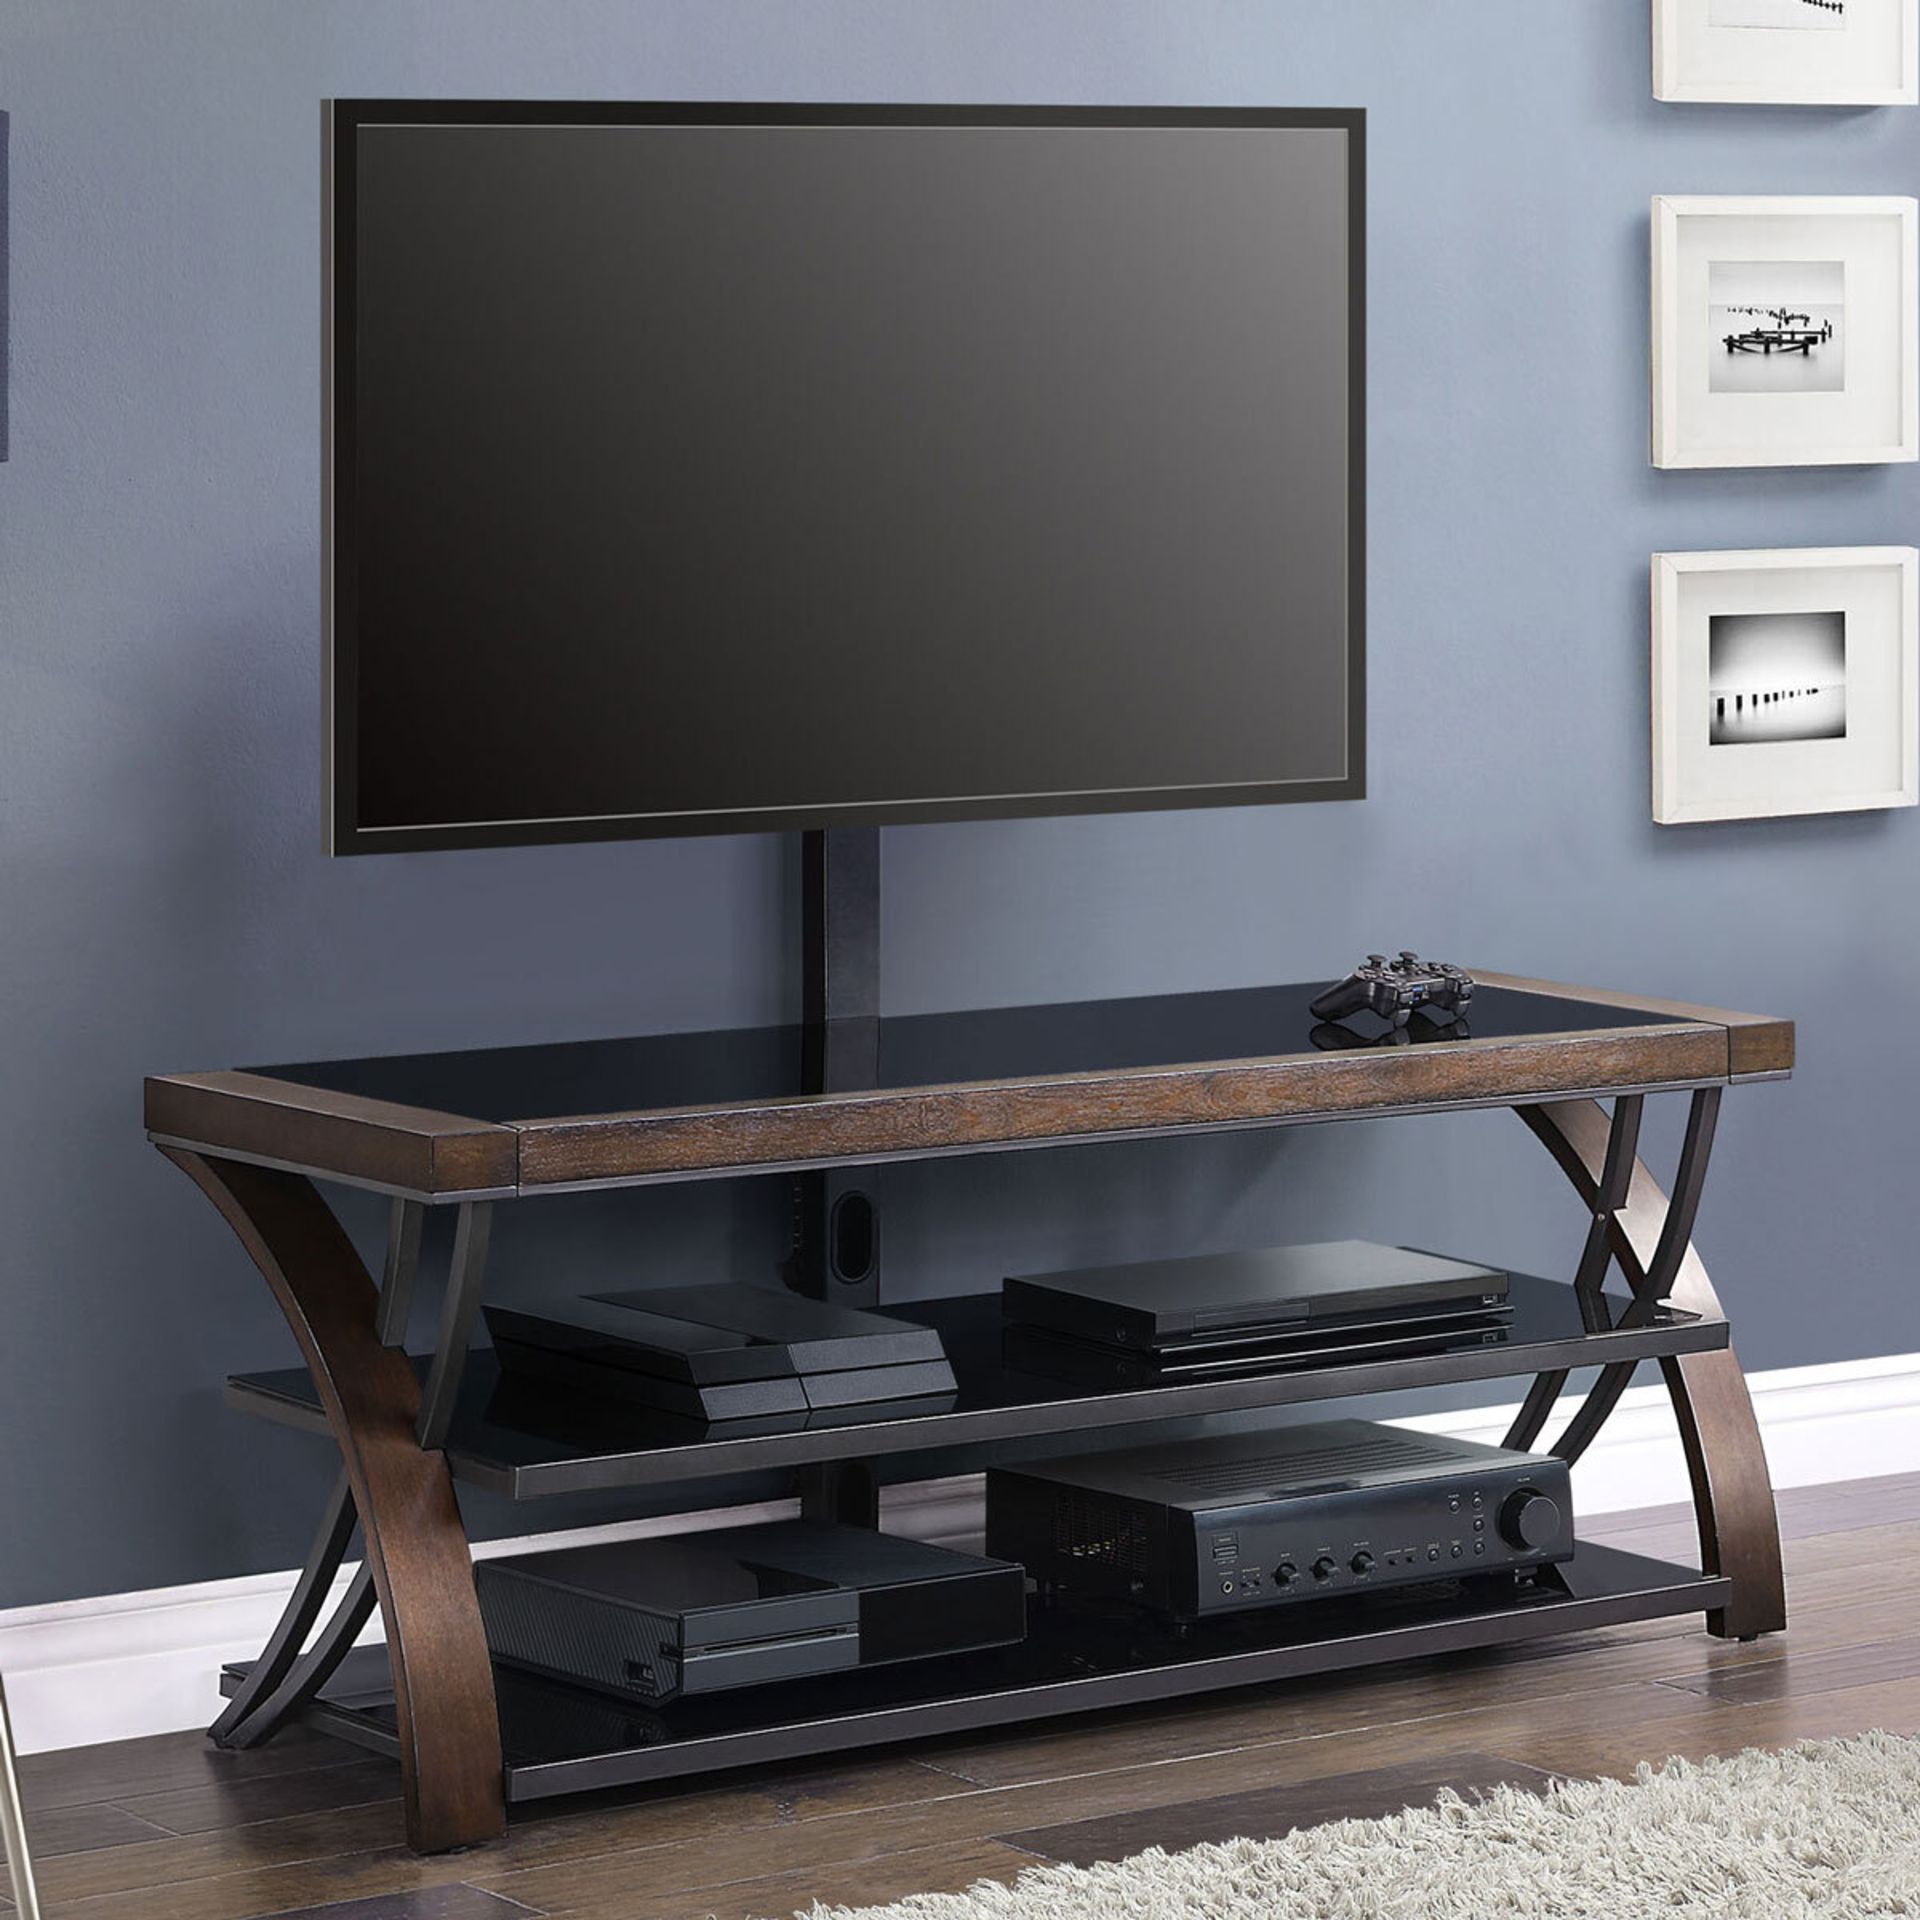 1 BOXED BAYSIDE FURNISHINGS BURKEDALE 3-IN-1 TV STAND FOR TVS UP TO 65" RRP Â£249 (GENERIC IMAGE